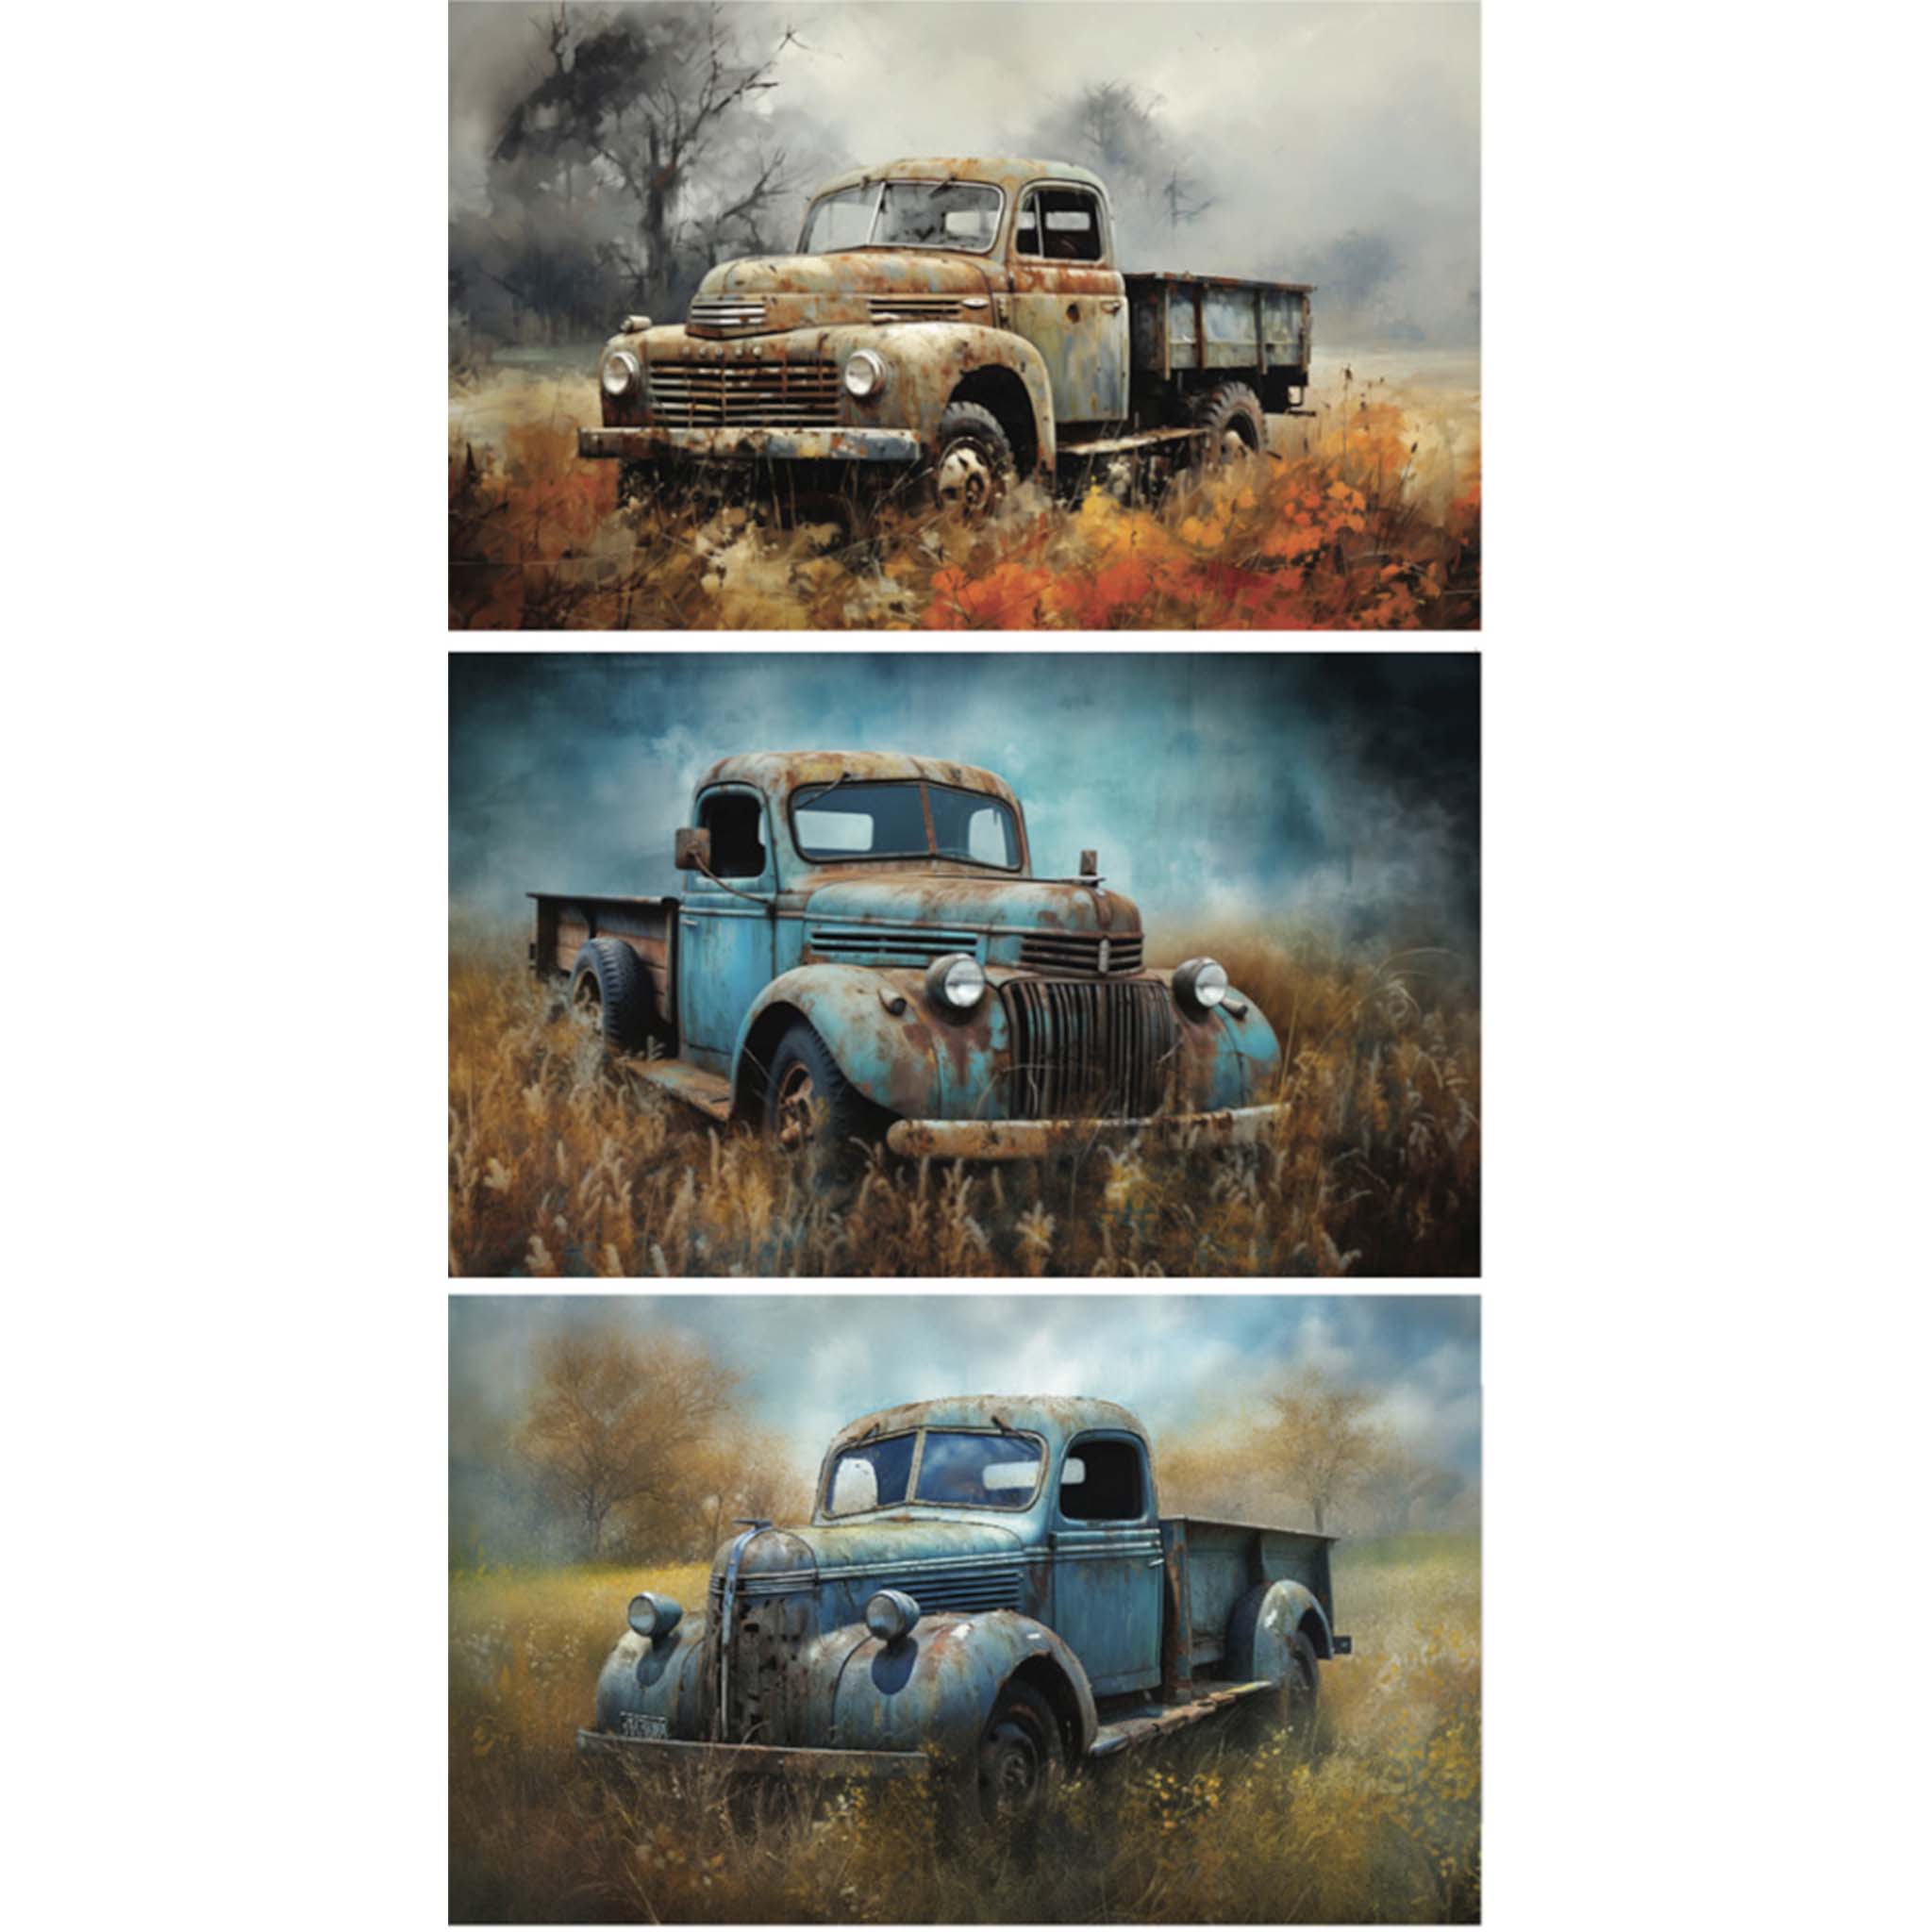 Three tissue papers against a white background feature vintage trucks rusting in open fields.